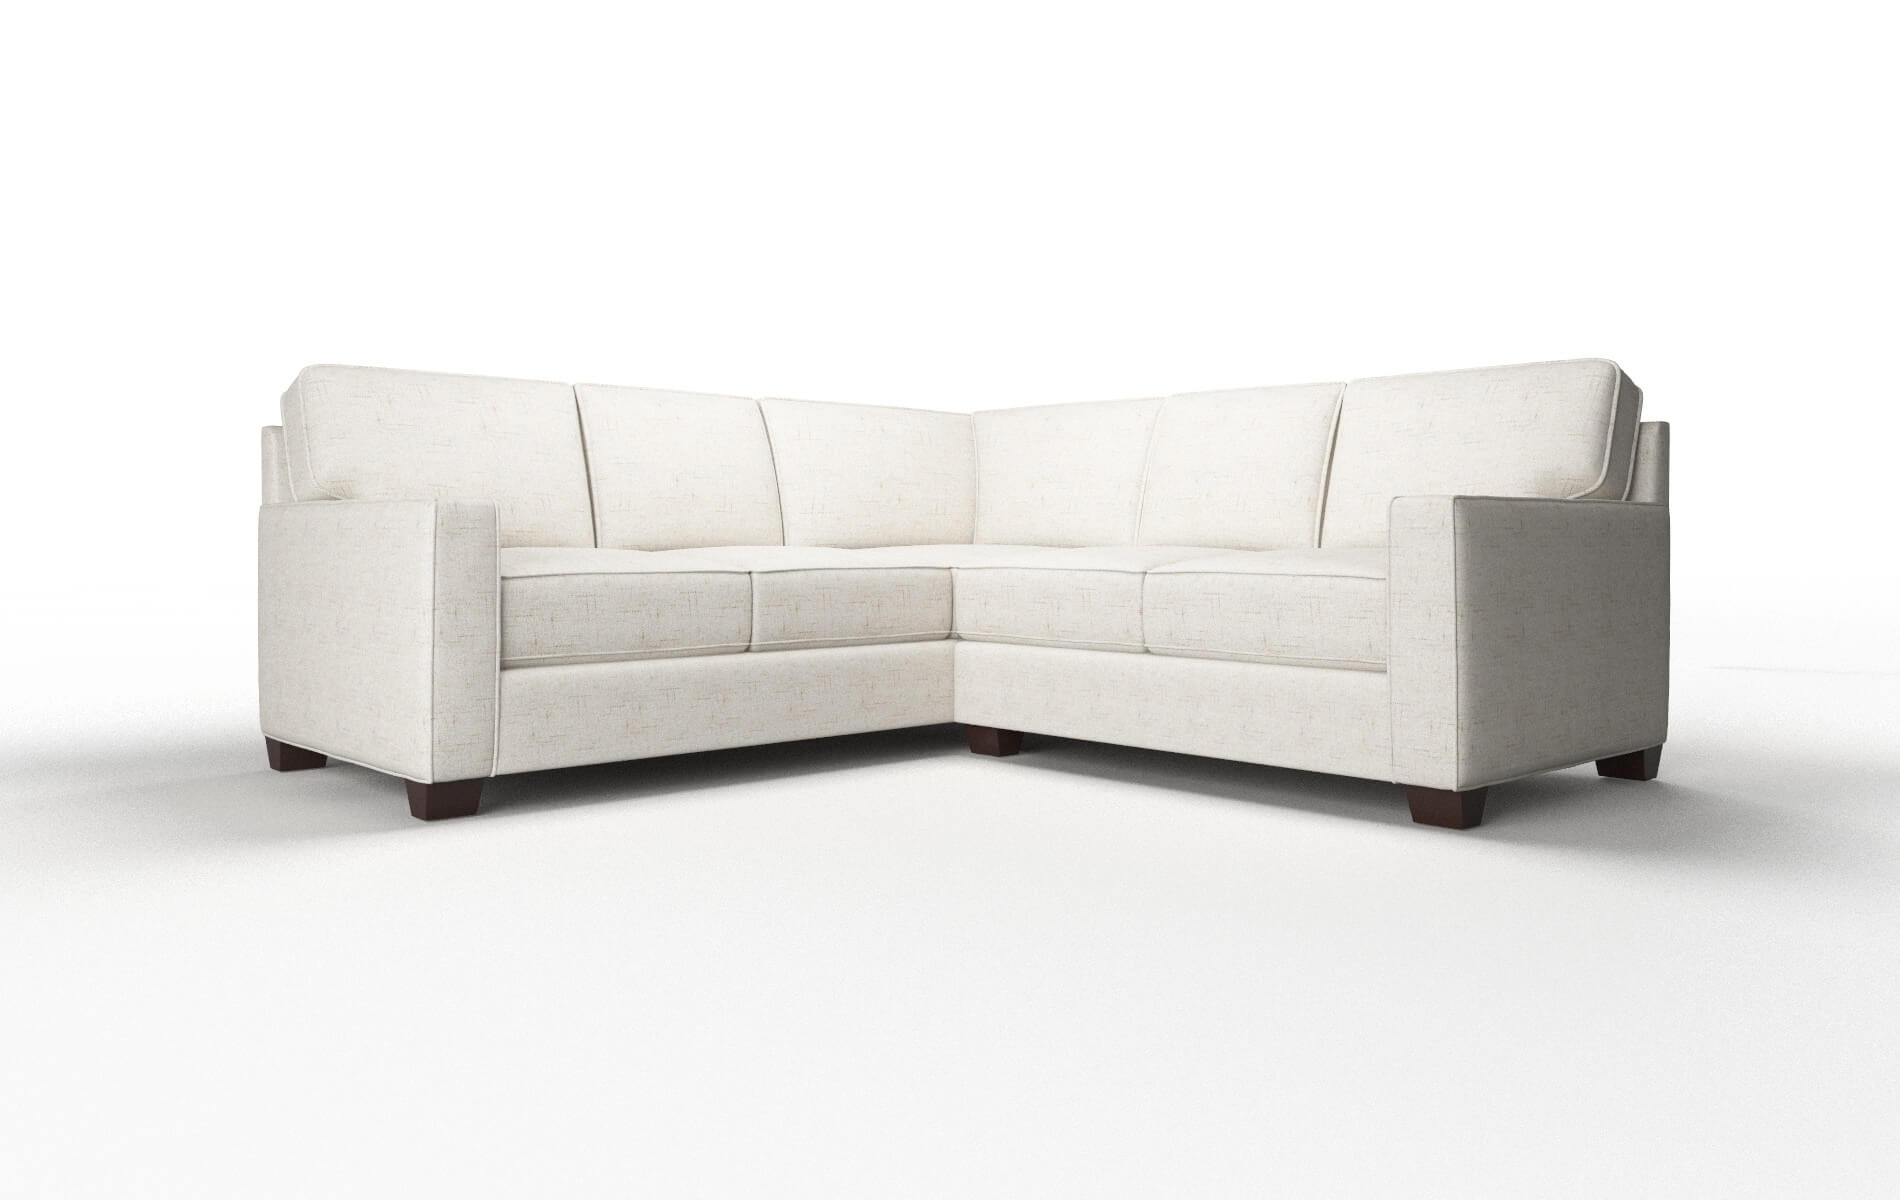 Chicago Oceanside Natural Sectional espresso legs 1